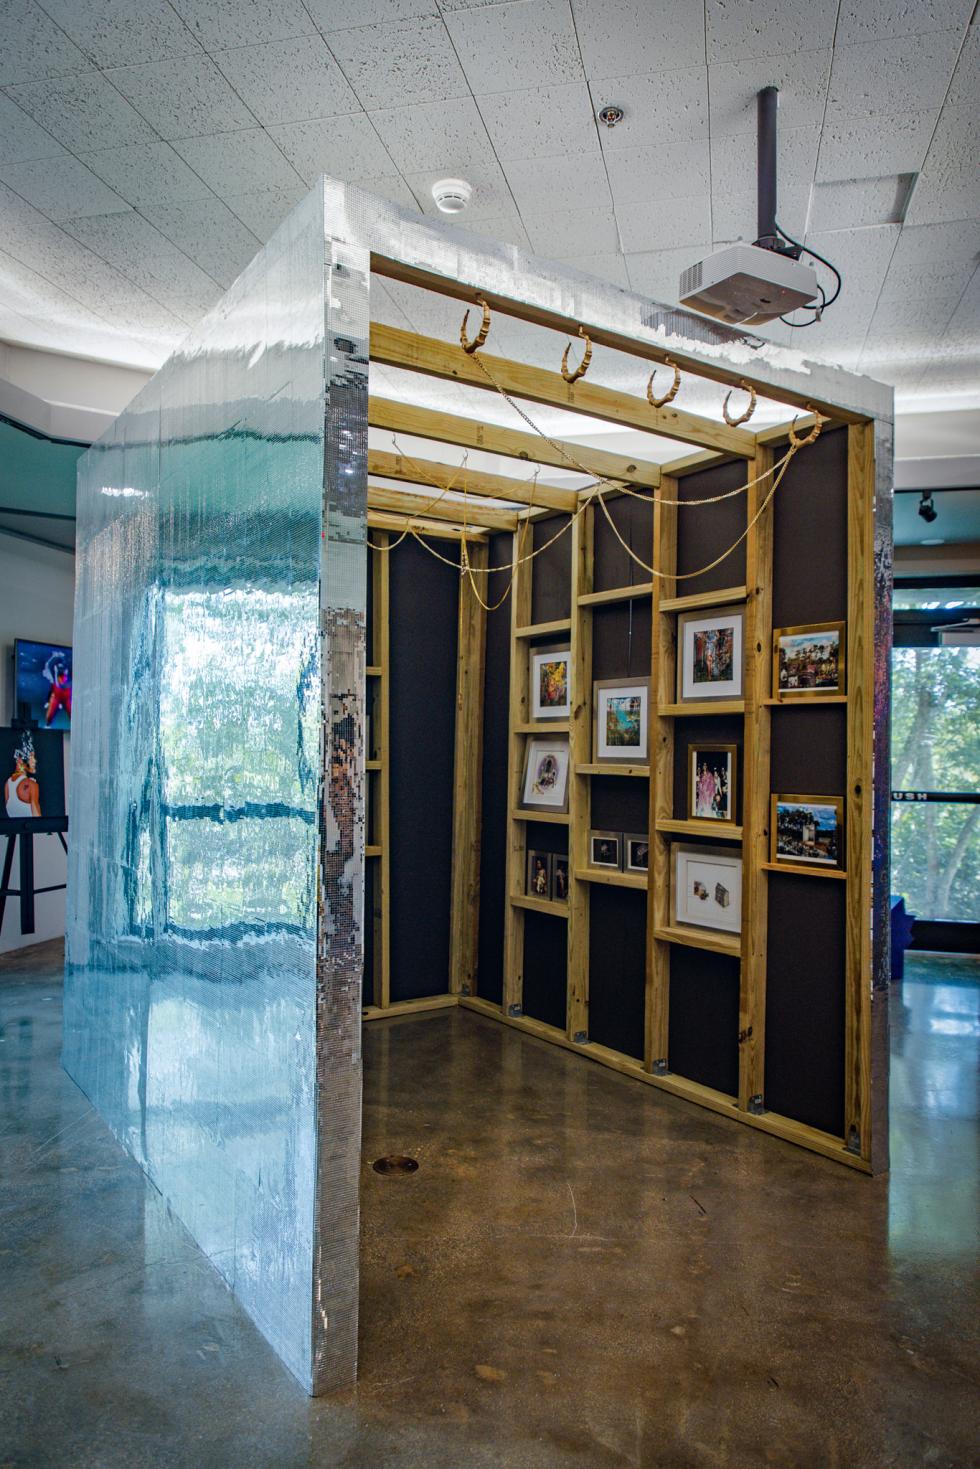 An artistic installation in a gallery featuring a reflective wall on the outside and on the interior a wooden frame with exposed beams and black walls. Framed photographs are displayed.